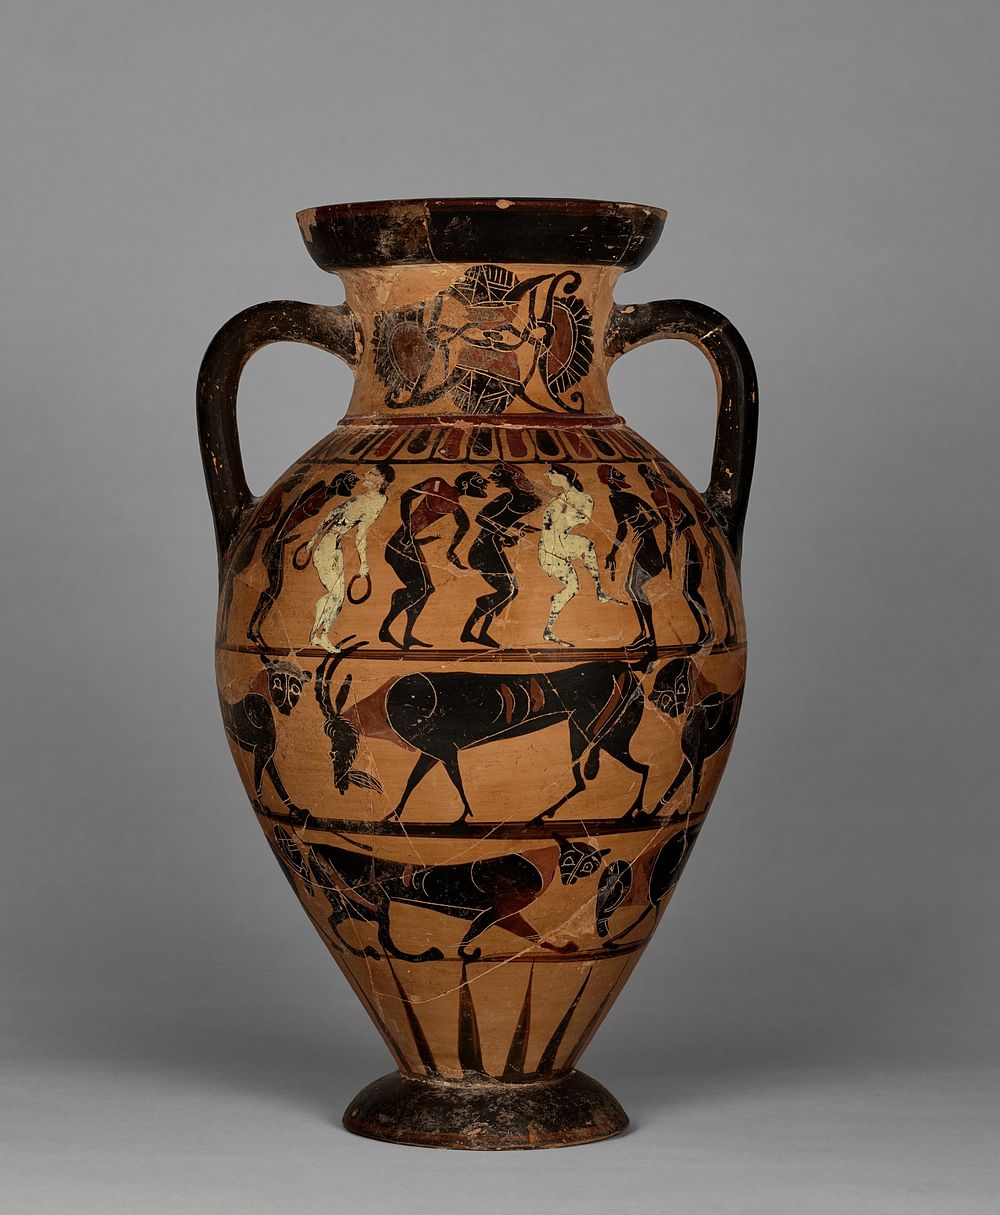 Neck amphora with (A) nude men and women, and (B) man and woman between sphinxes by Timiades Painter